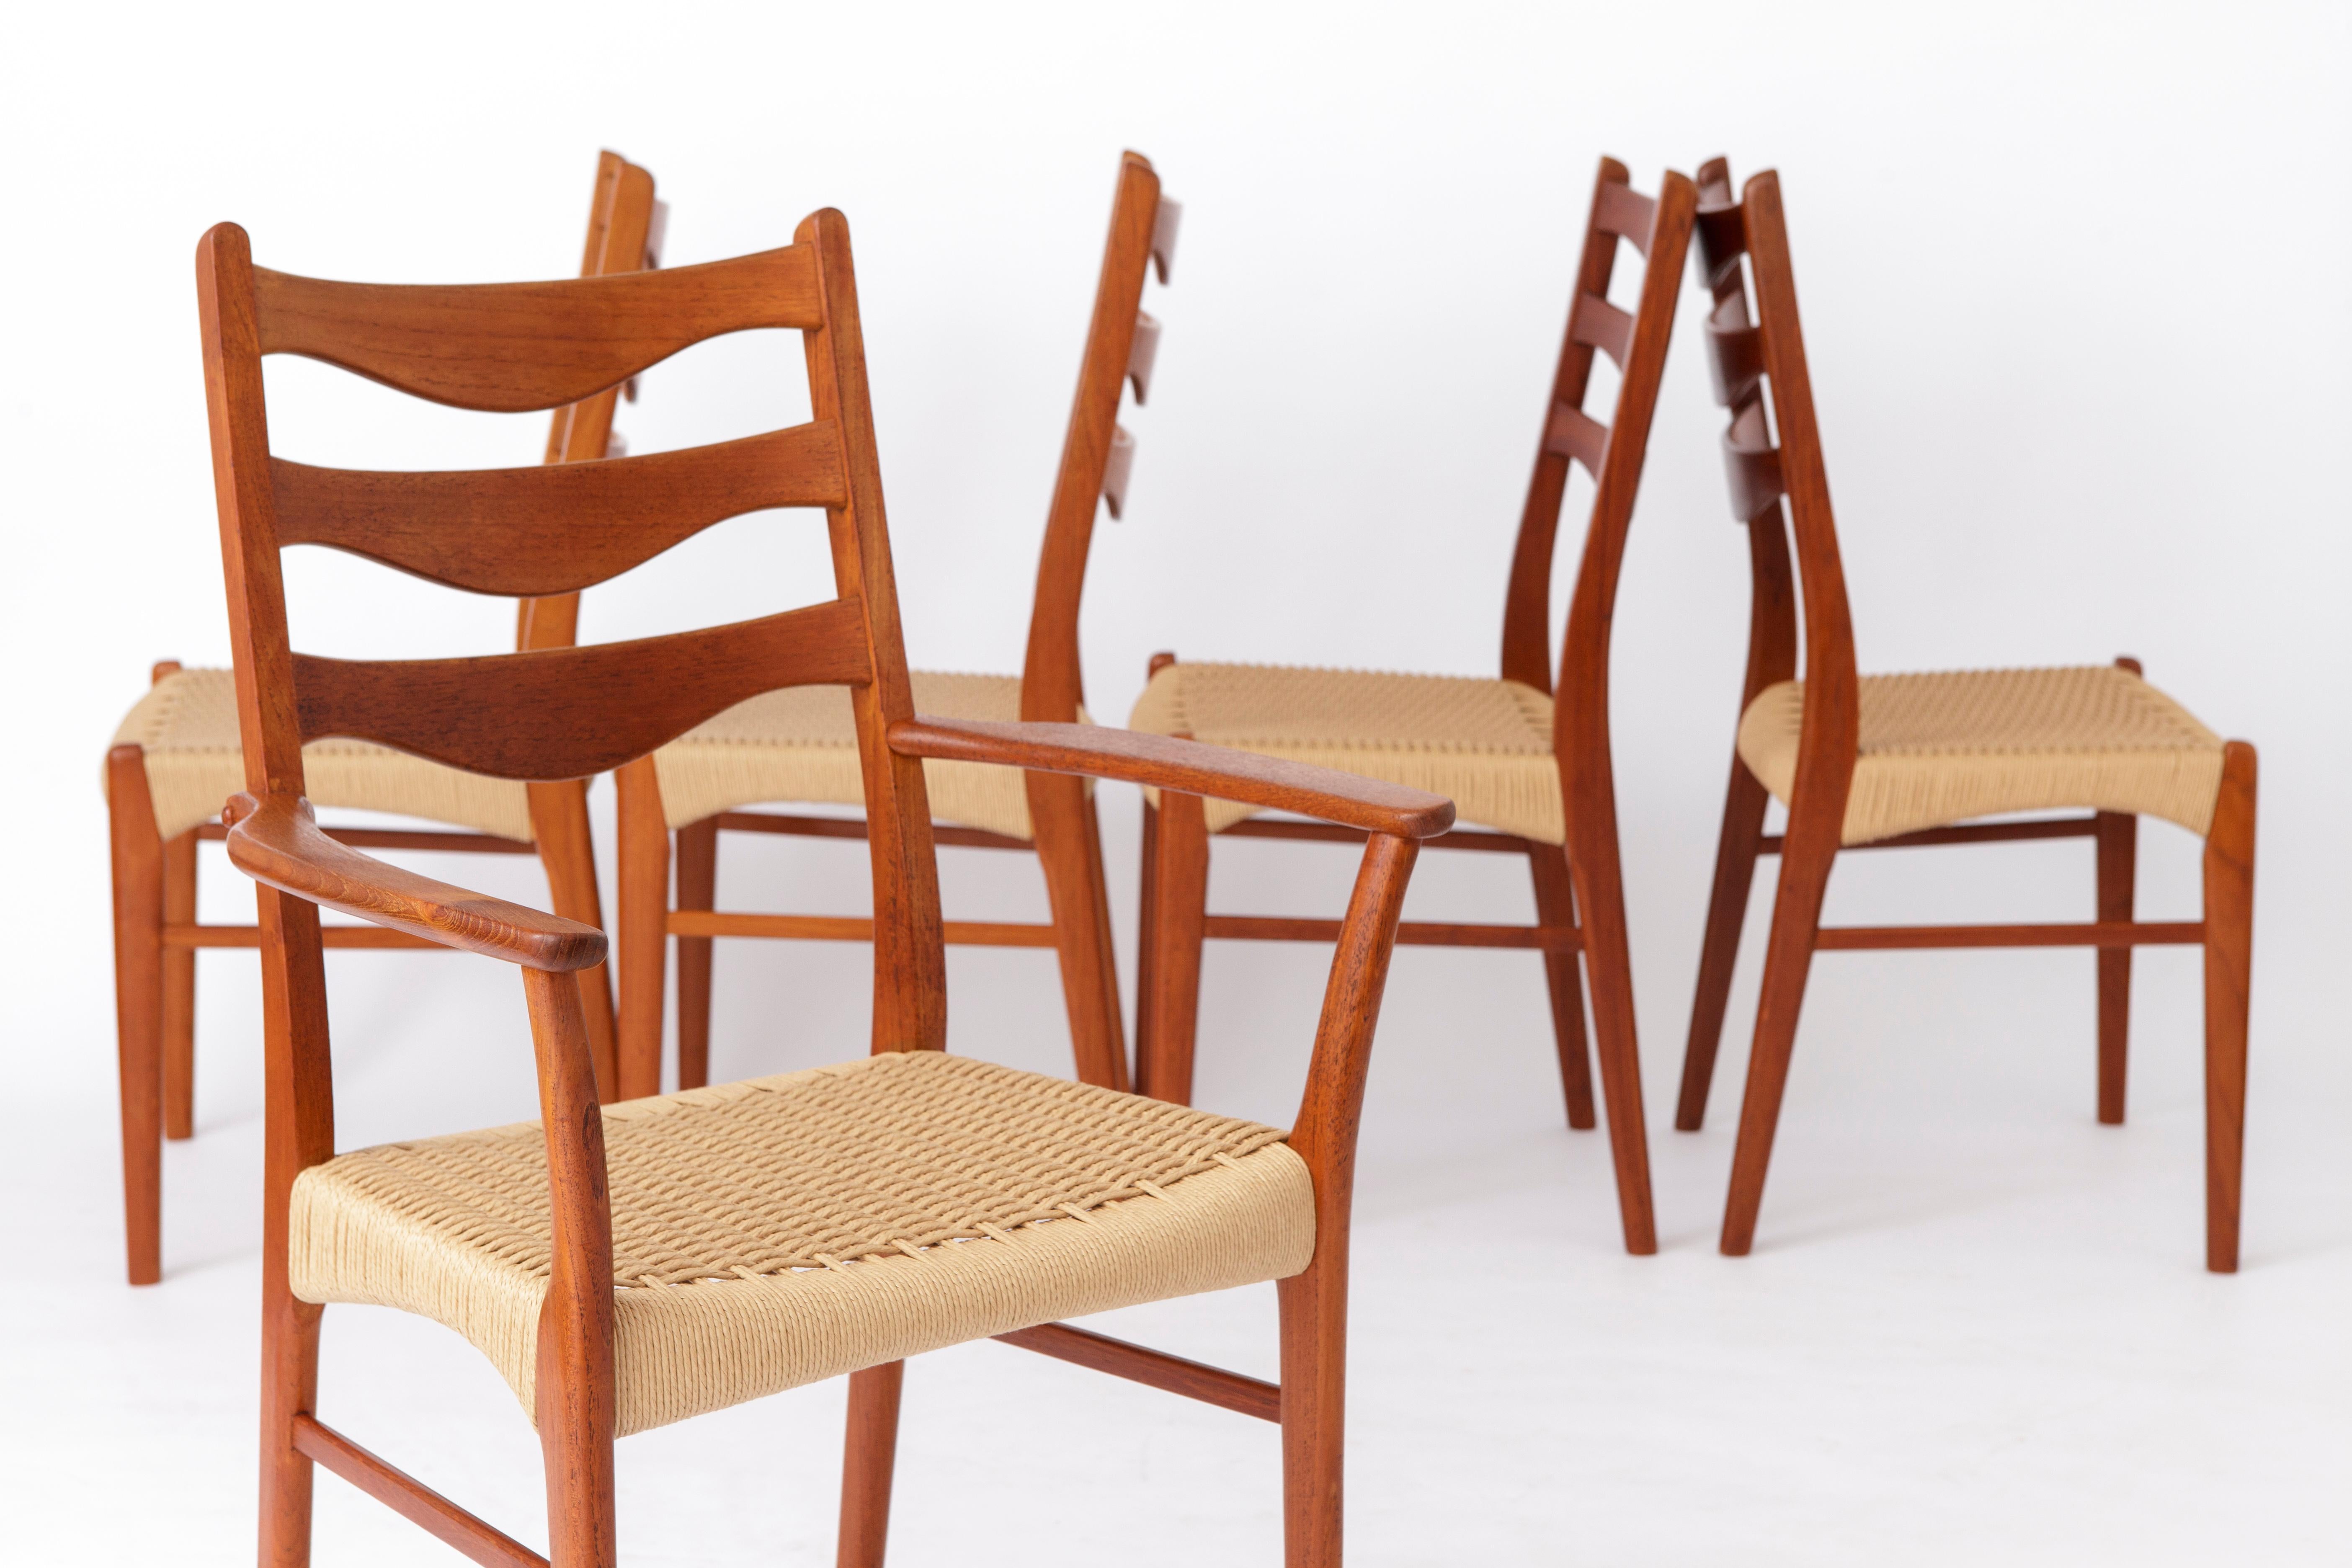 Set of 5 Danish dining chairs designed by Arne Wahl Iversen, Denmark. 
Manufactured by Glyngøre Stolefabrik in the 1960s-1970s. 
Model GS91. Displayed price is for a set of 5 chairs. 

Good vintage condition. Sturdy teak chair frames were